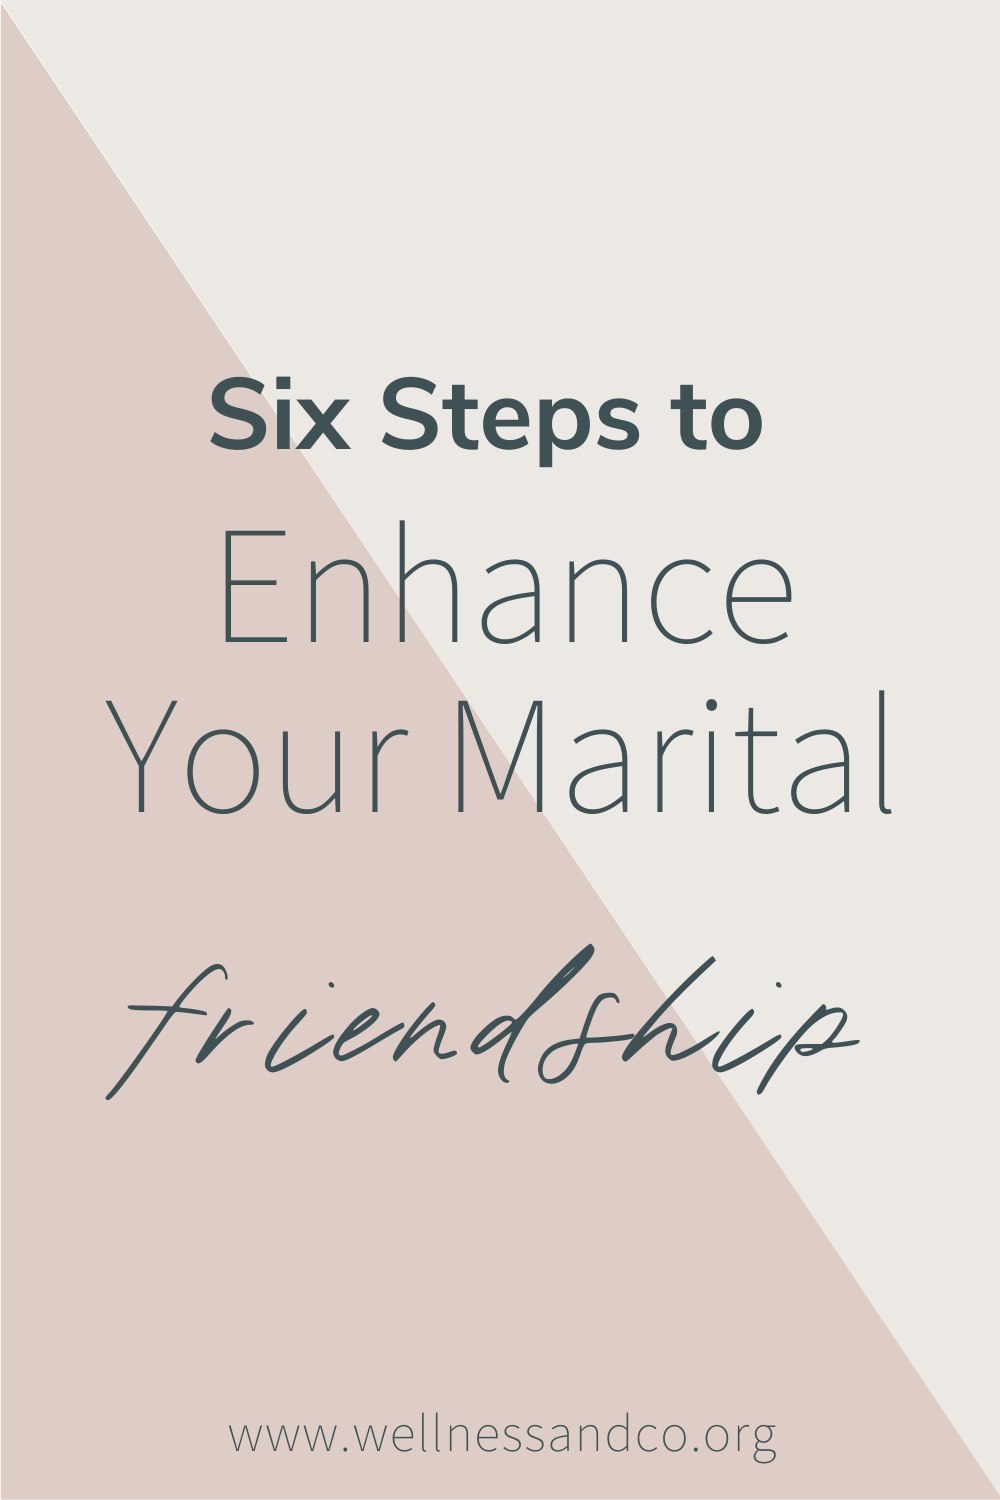 Six Steps to Enhance Your Marital Friendship | Curious how to have the strongest friendship with your spouse or partner ever? Check out this blog post to learn six steps to a healthier relationship and a healthier you! Cheers!